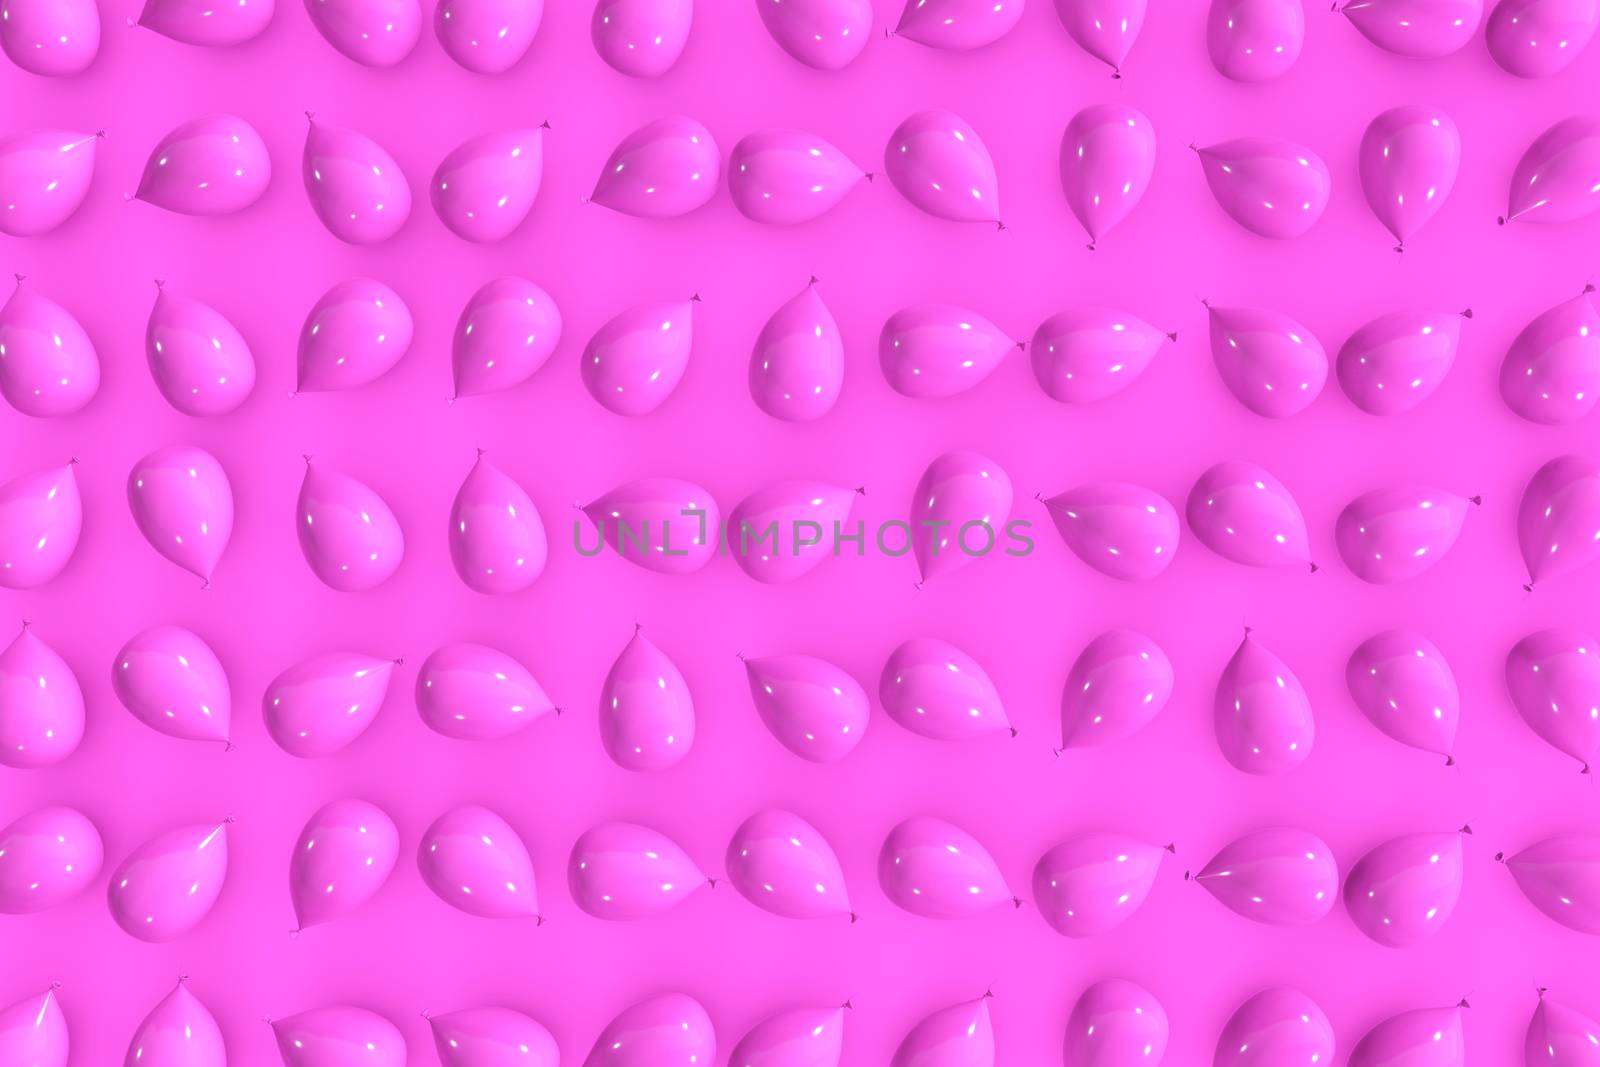 Pink baloons background 3d rendering abstract minimalistic design